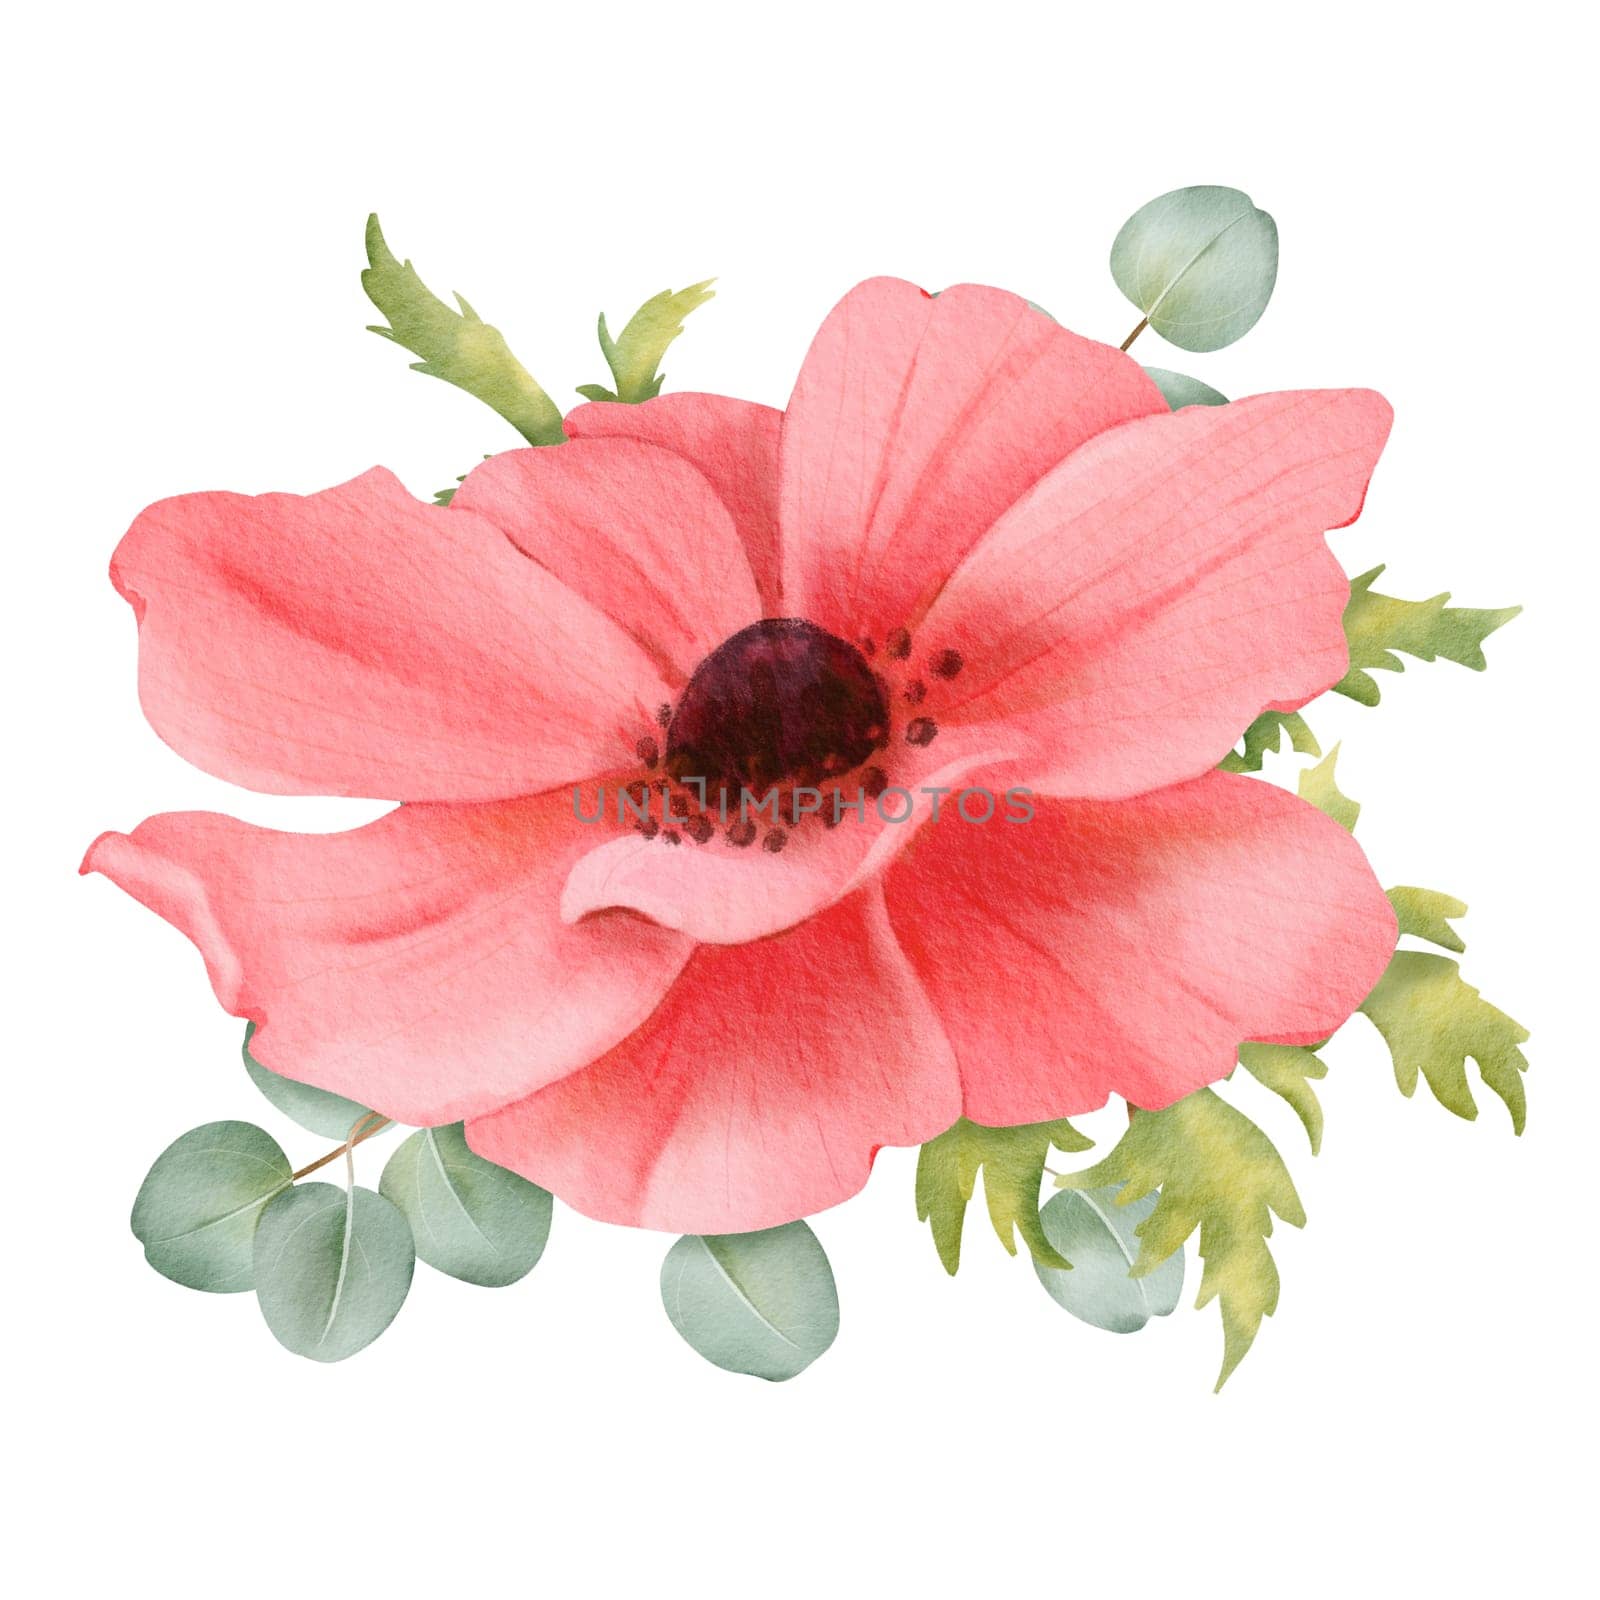 A watercolor floral composition featuring pink anemones, fresh greenery, and eucalyptus leaves. isolated object for use in design projects, wedding invitations, greeting cards or digital illustrations by Art_Mari_Ka